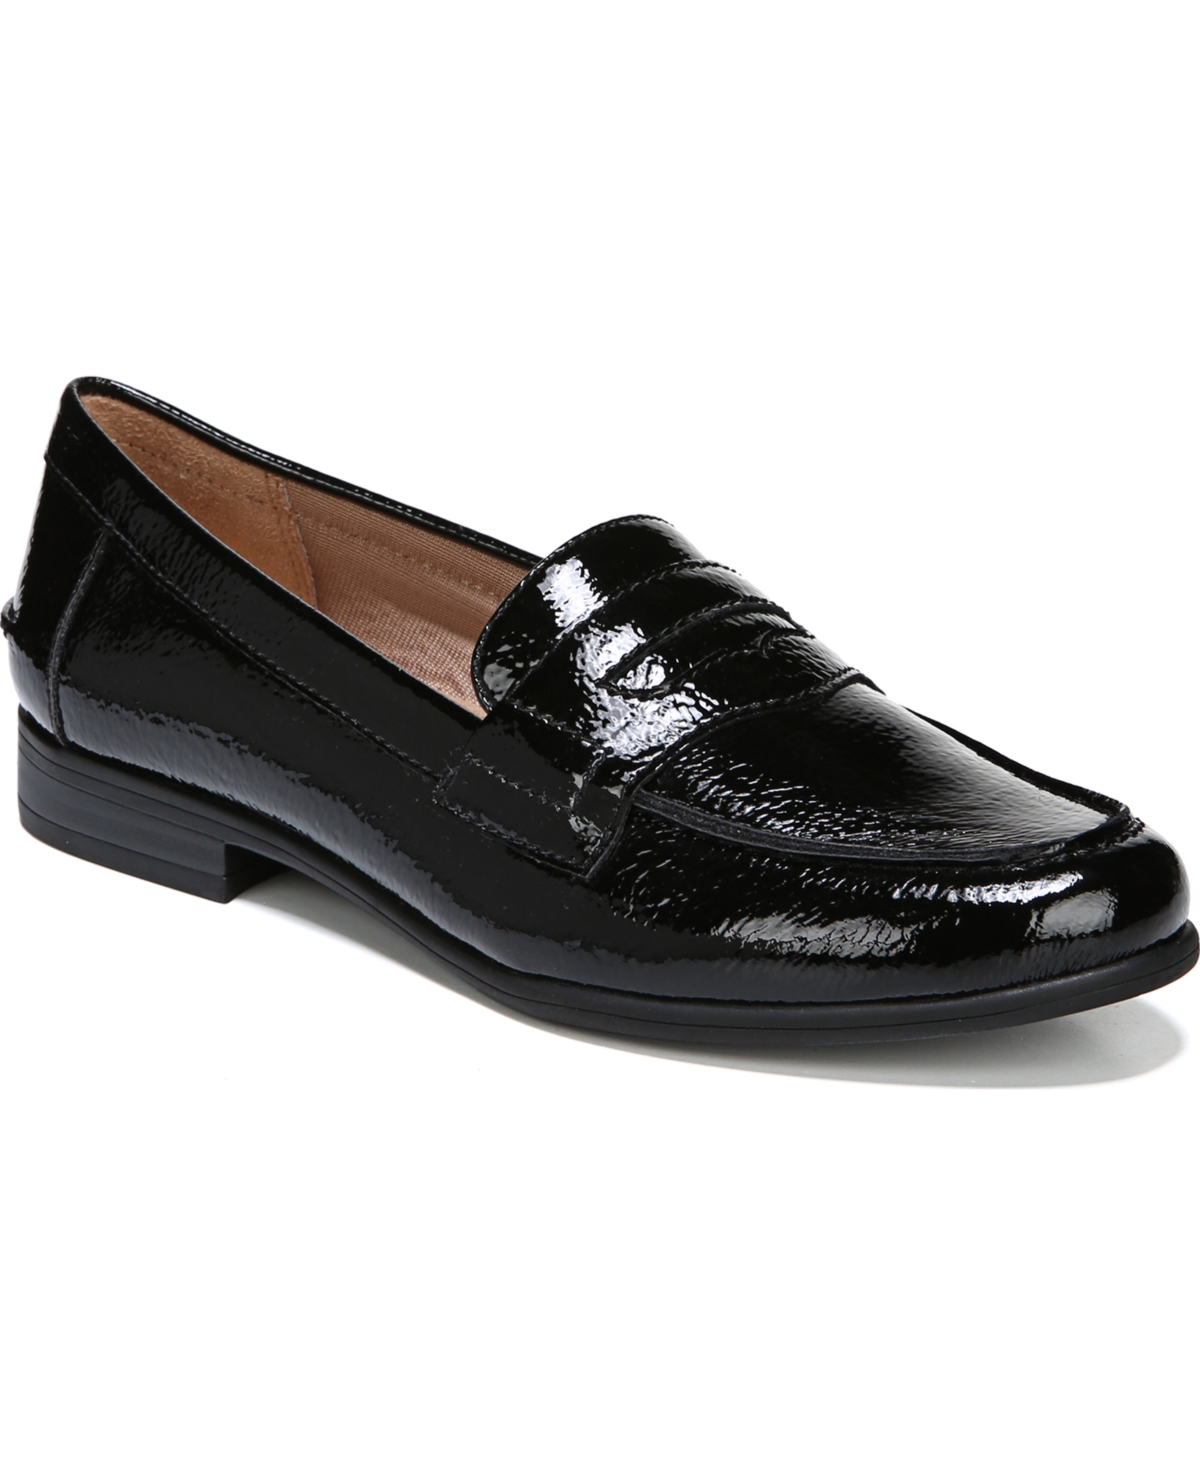 Women's Madison Slip On Penny Loafers - Black Faux Leather